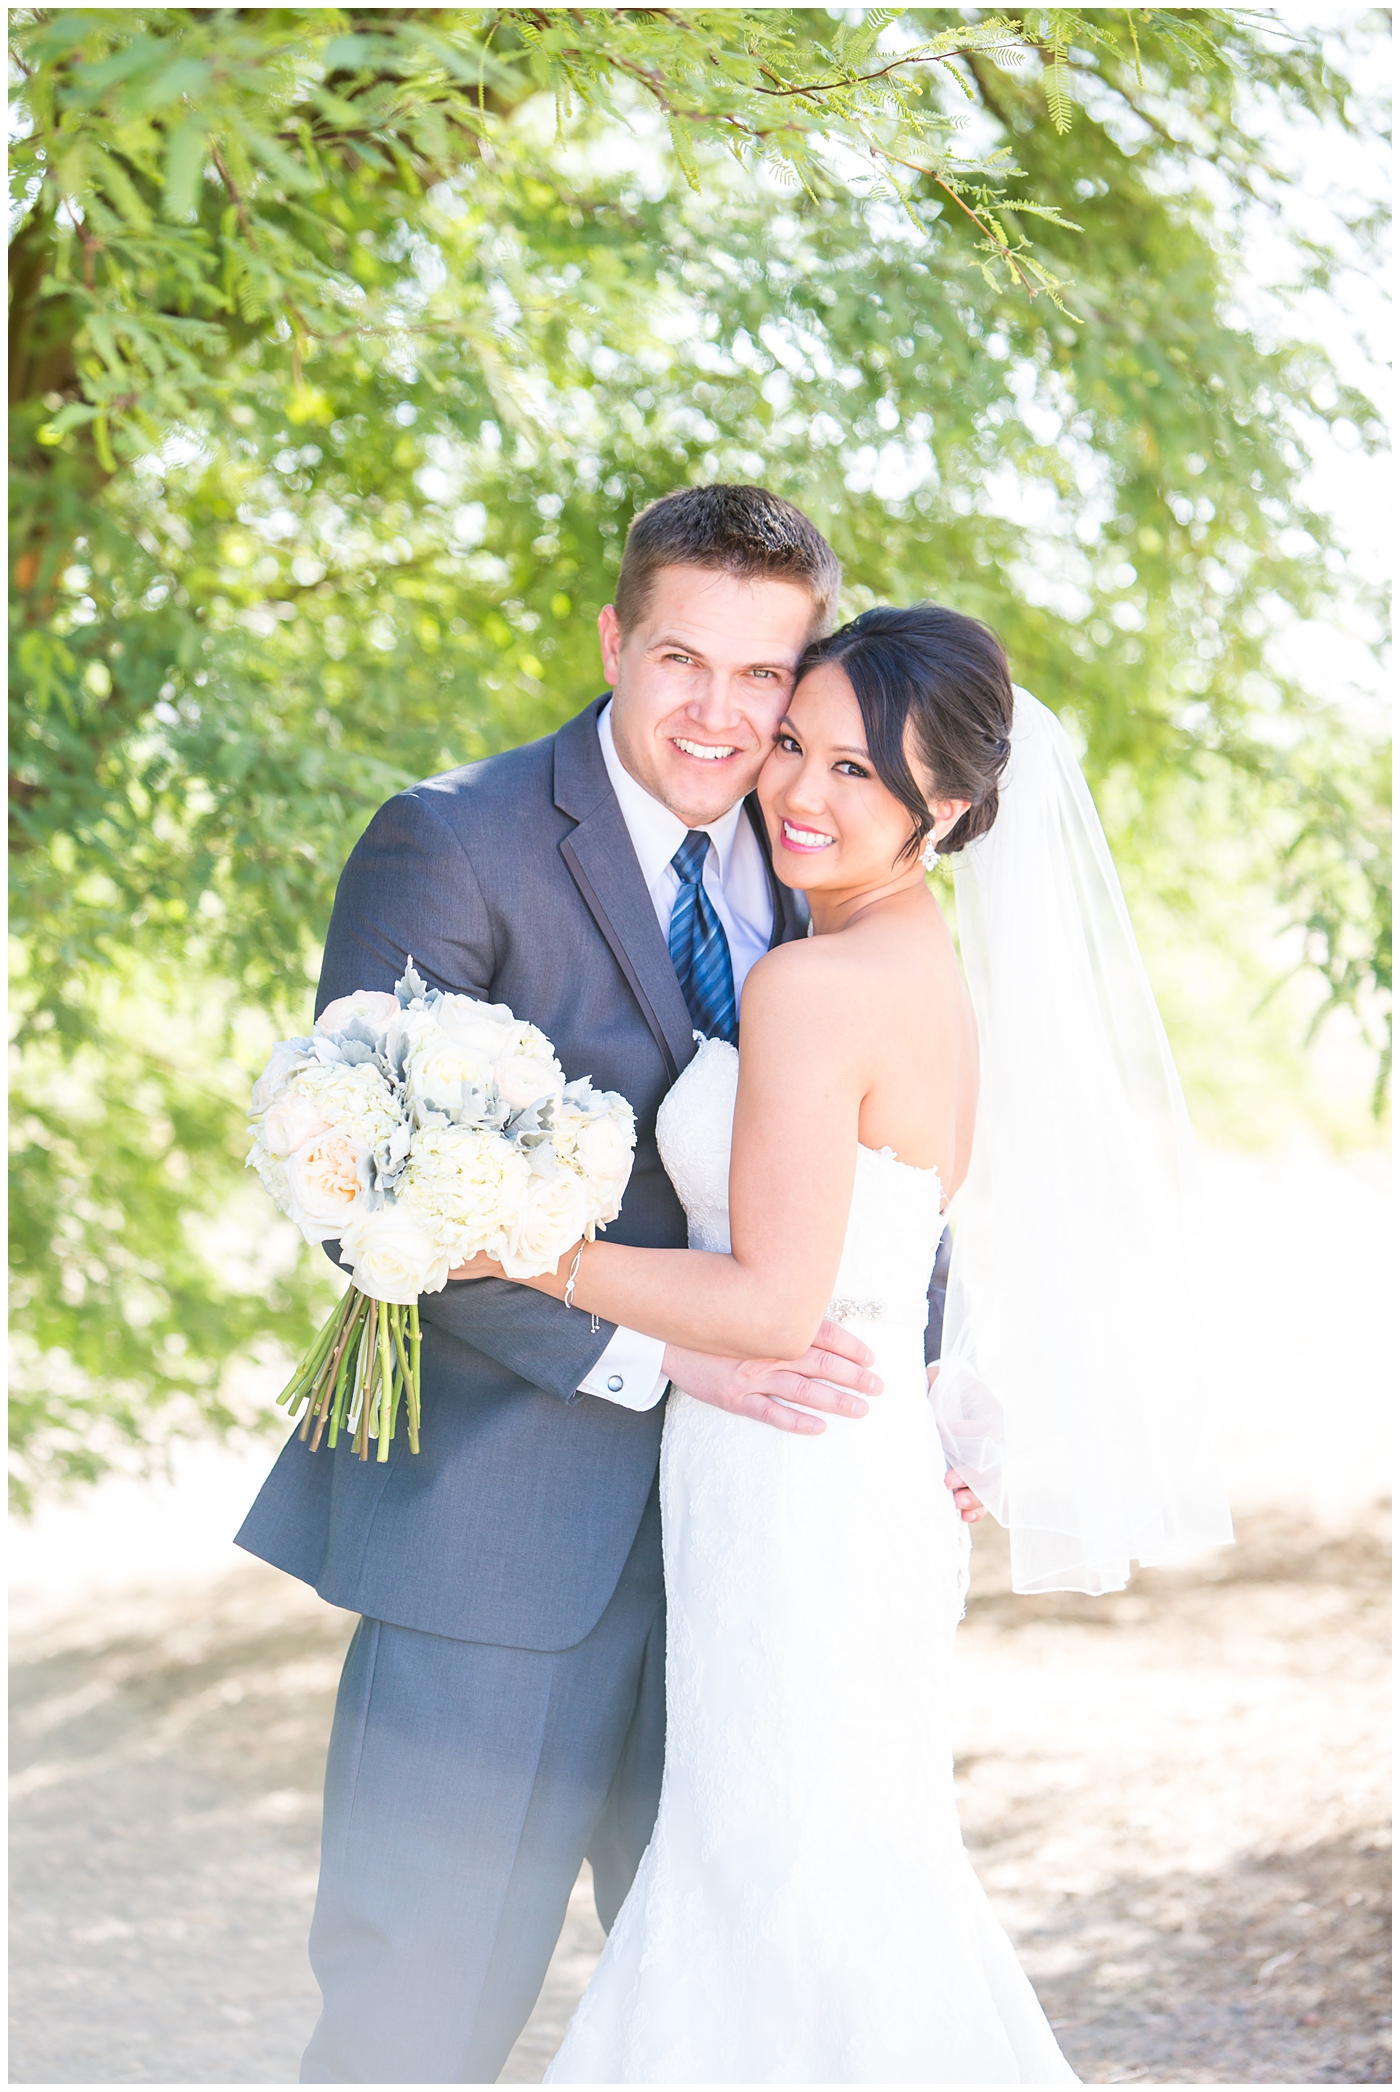 Bride in strapless maggie sorrento dress with soft white and pink roses bouquet with groom in light gray suit with blue tie and white rose boutonniere wedding day portrait